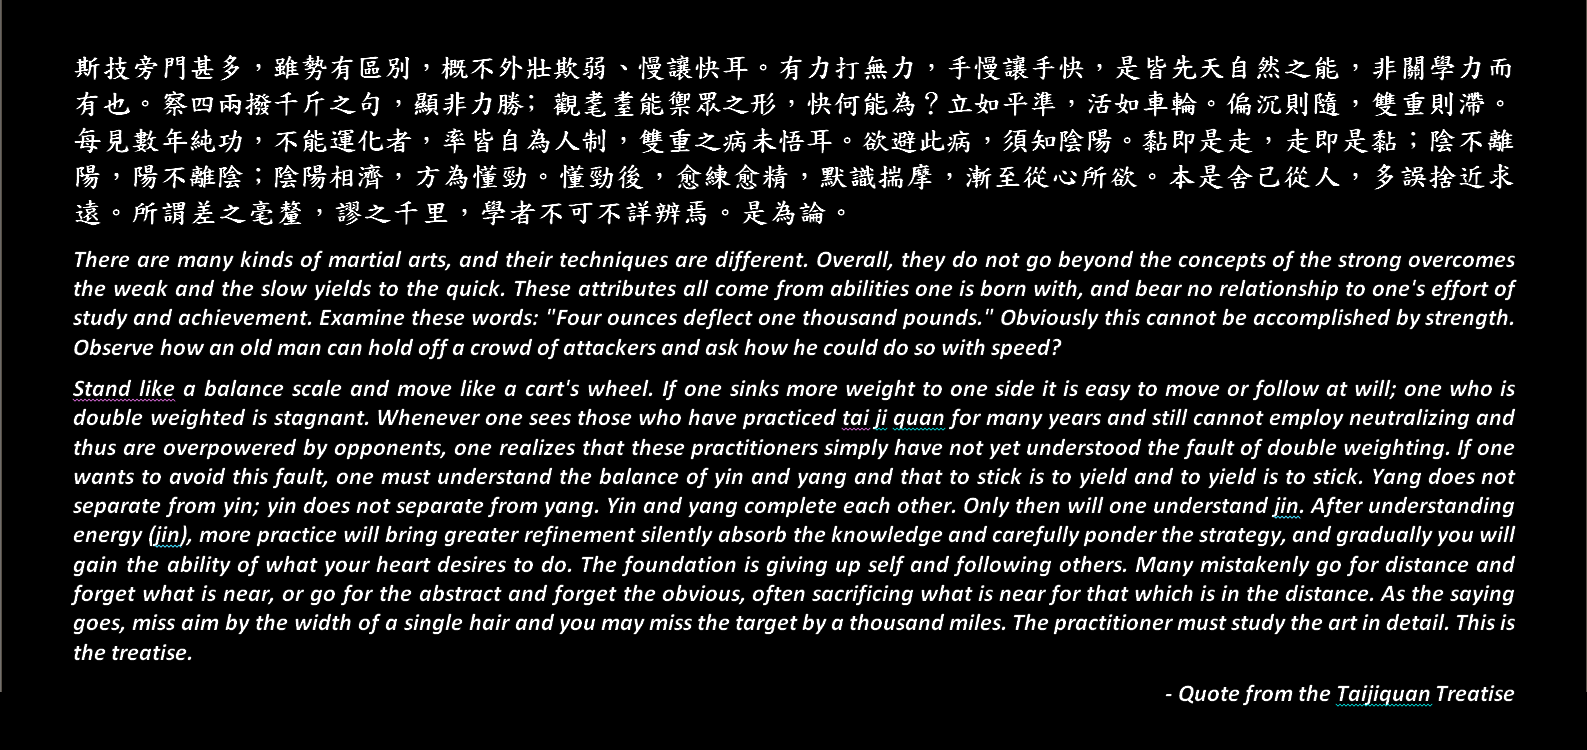 The Taijiquan Treatise Explained: Part 3 of 3 (太極拳論-3)